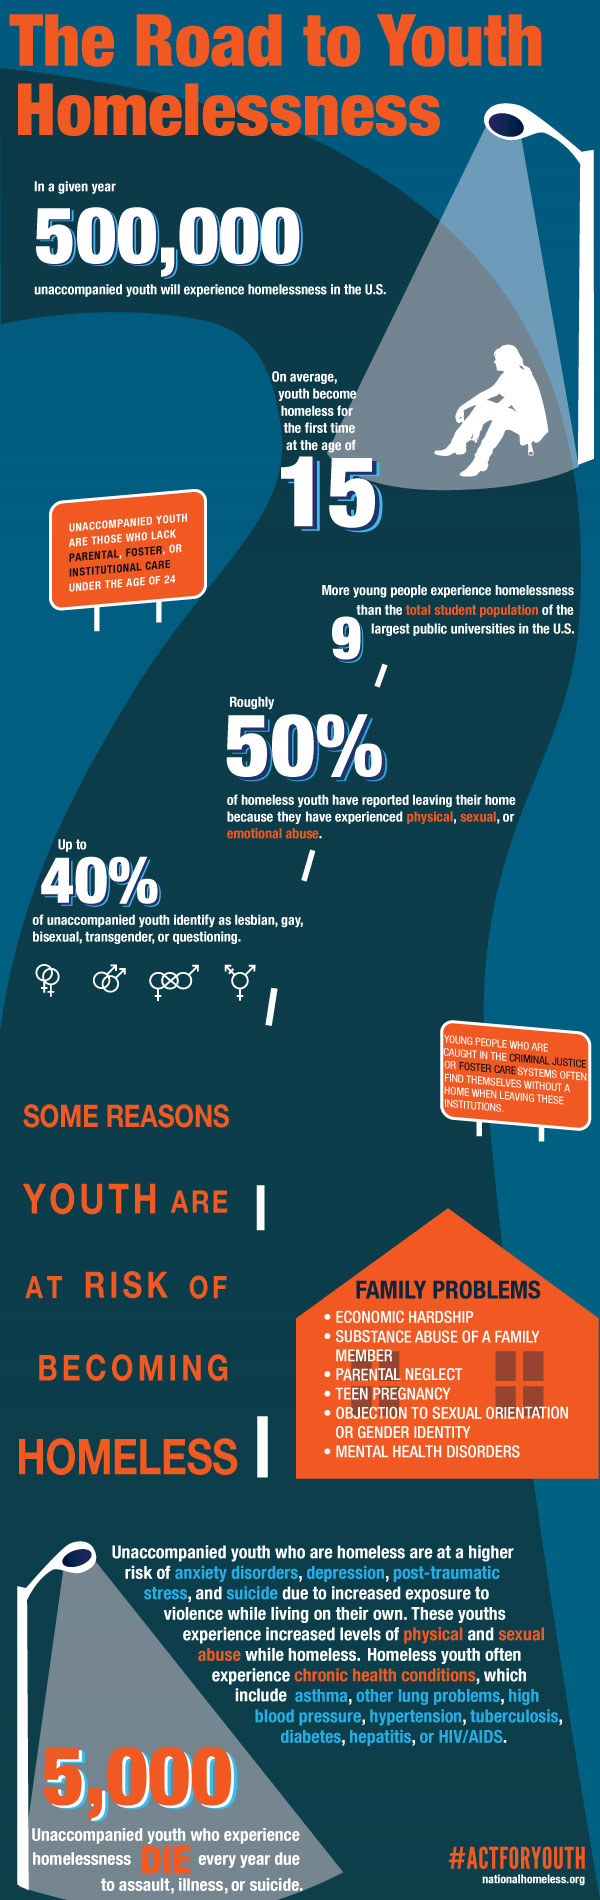 The Road to Youth Homelessness by the National Coalition for the Homeless